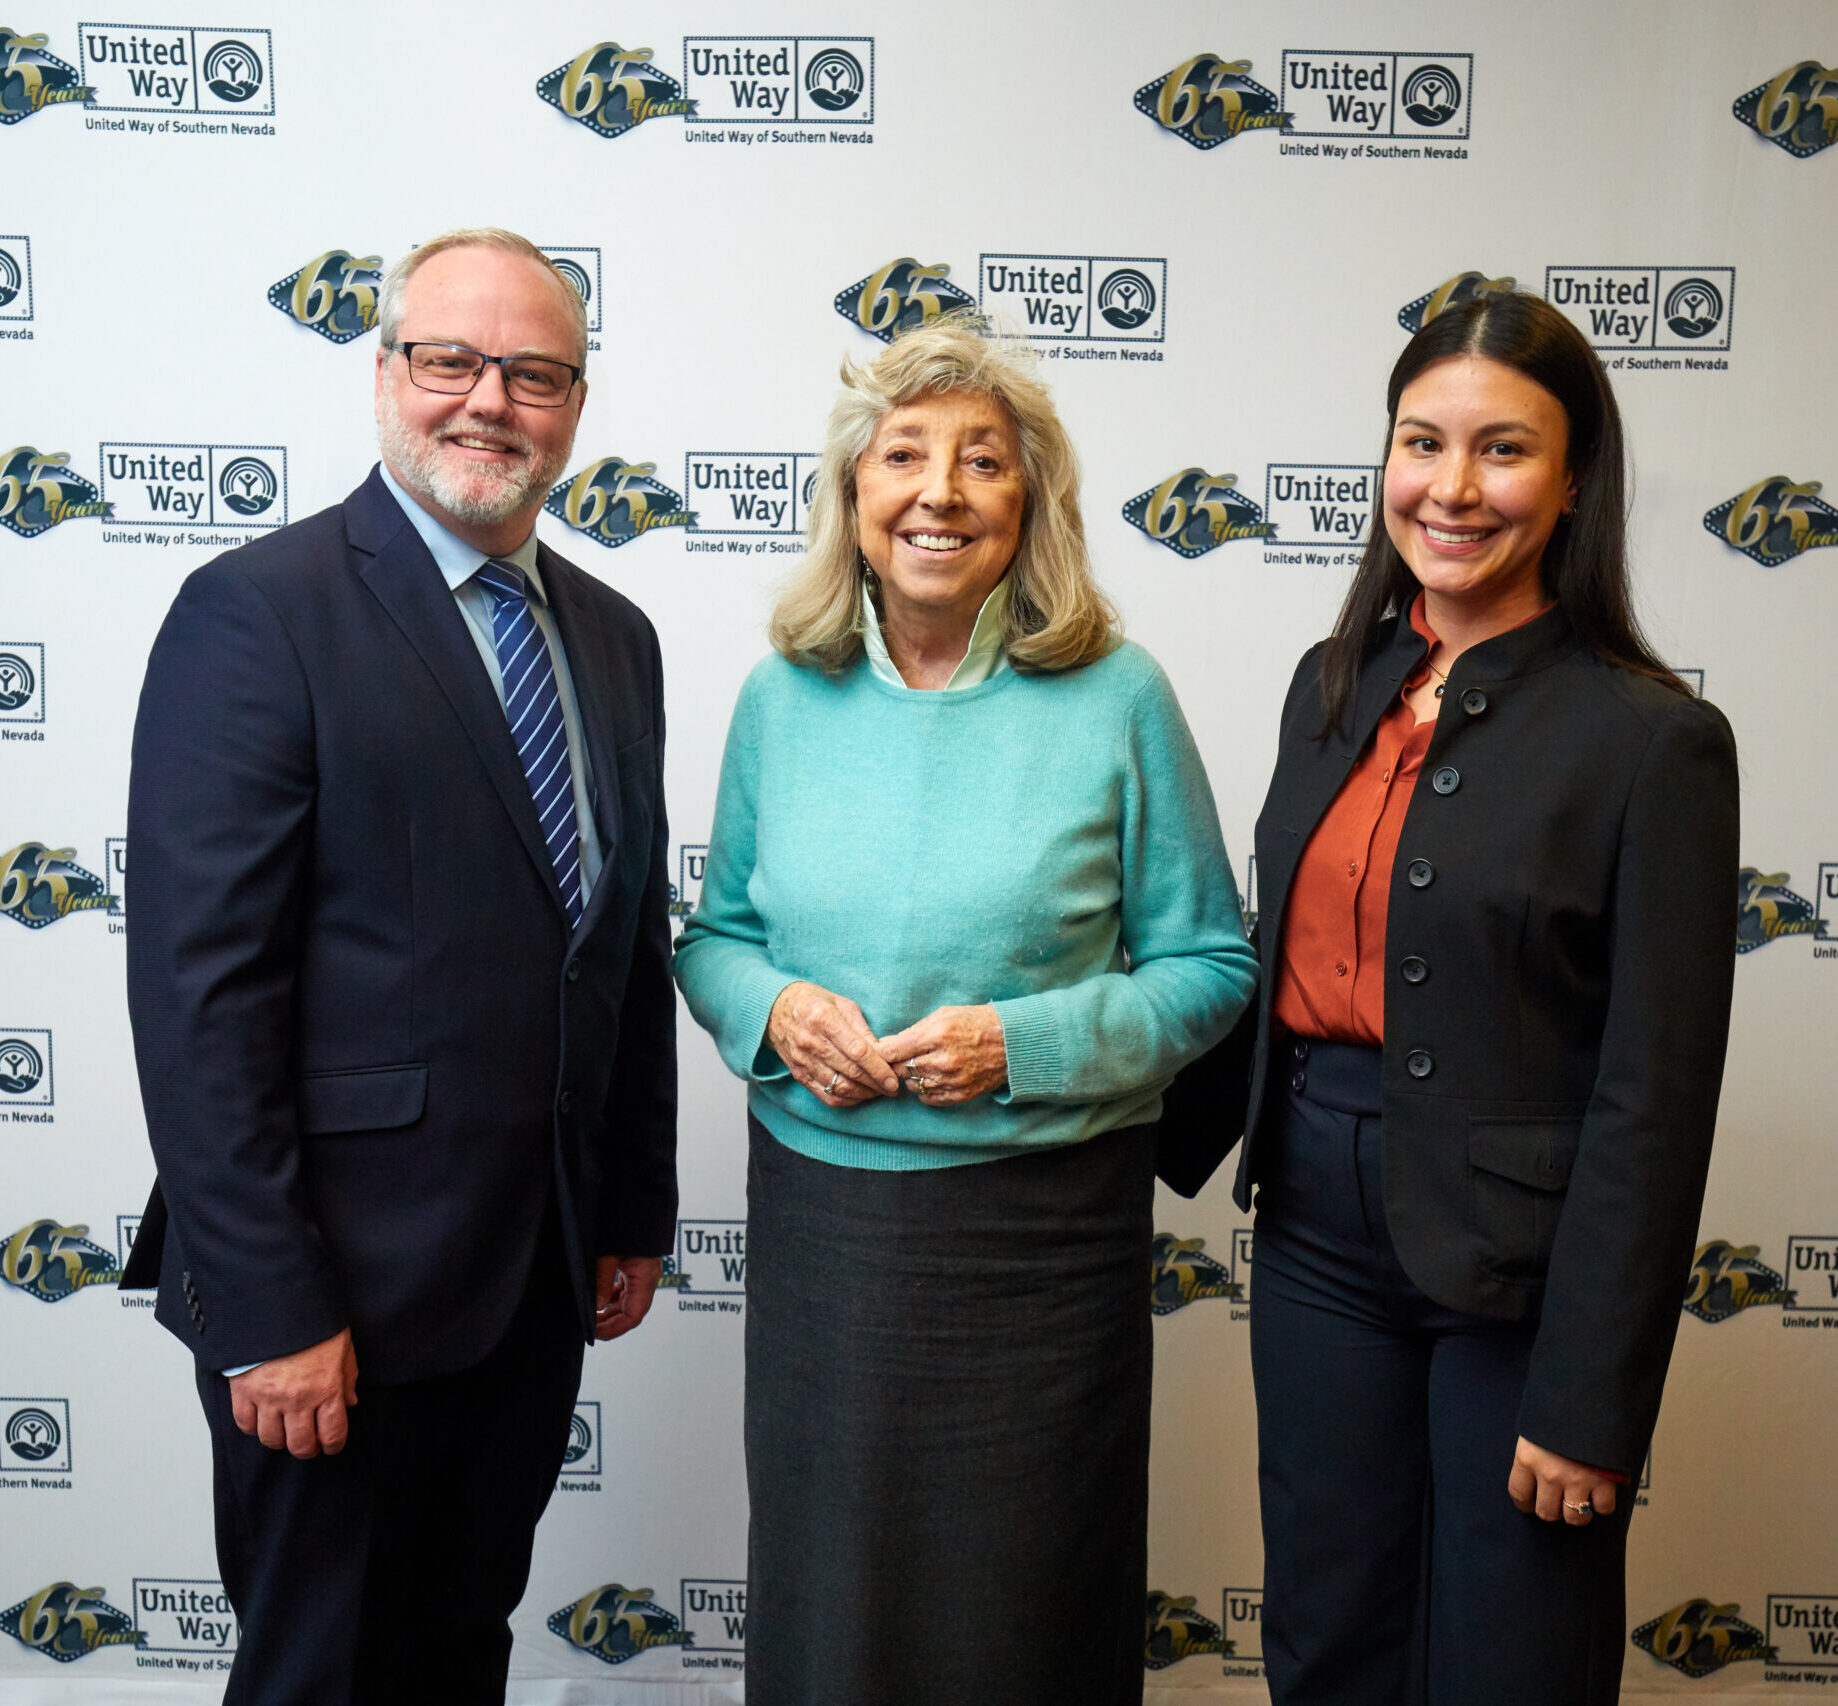 Samuel Rudd, Congresswoman Dina Titus and Janet Quintero standing in front of white background with black and gold UWSN 65th logo. Samuel and Janet are in black suits and Dina Titus is in a teal sweater.